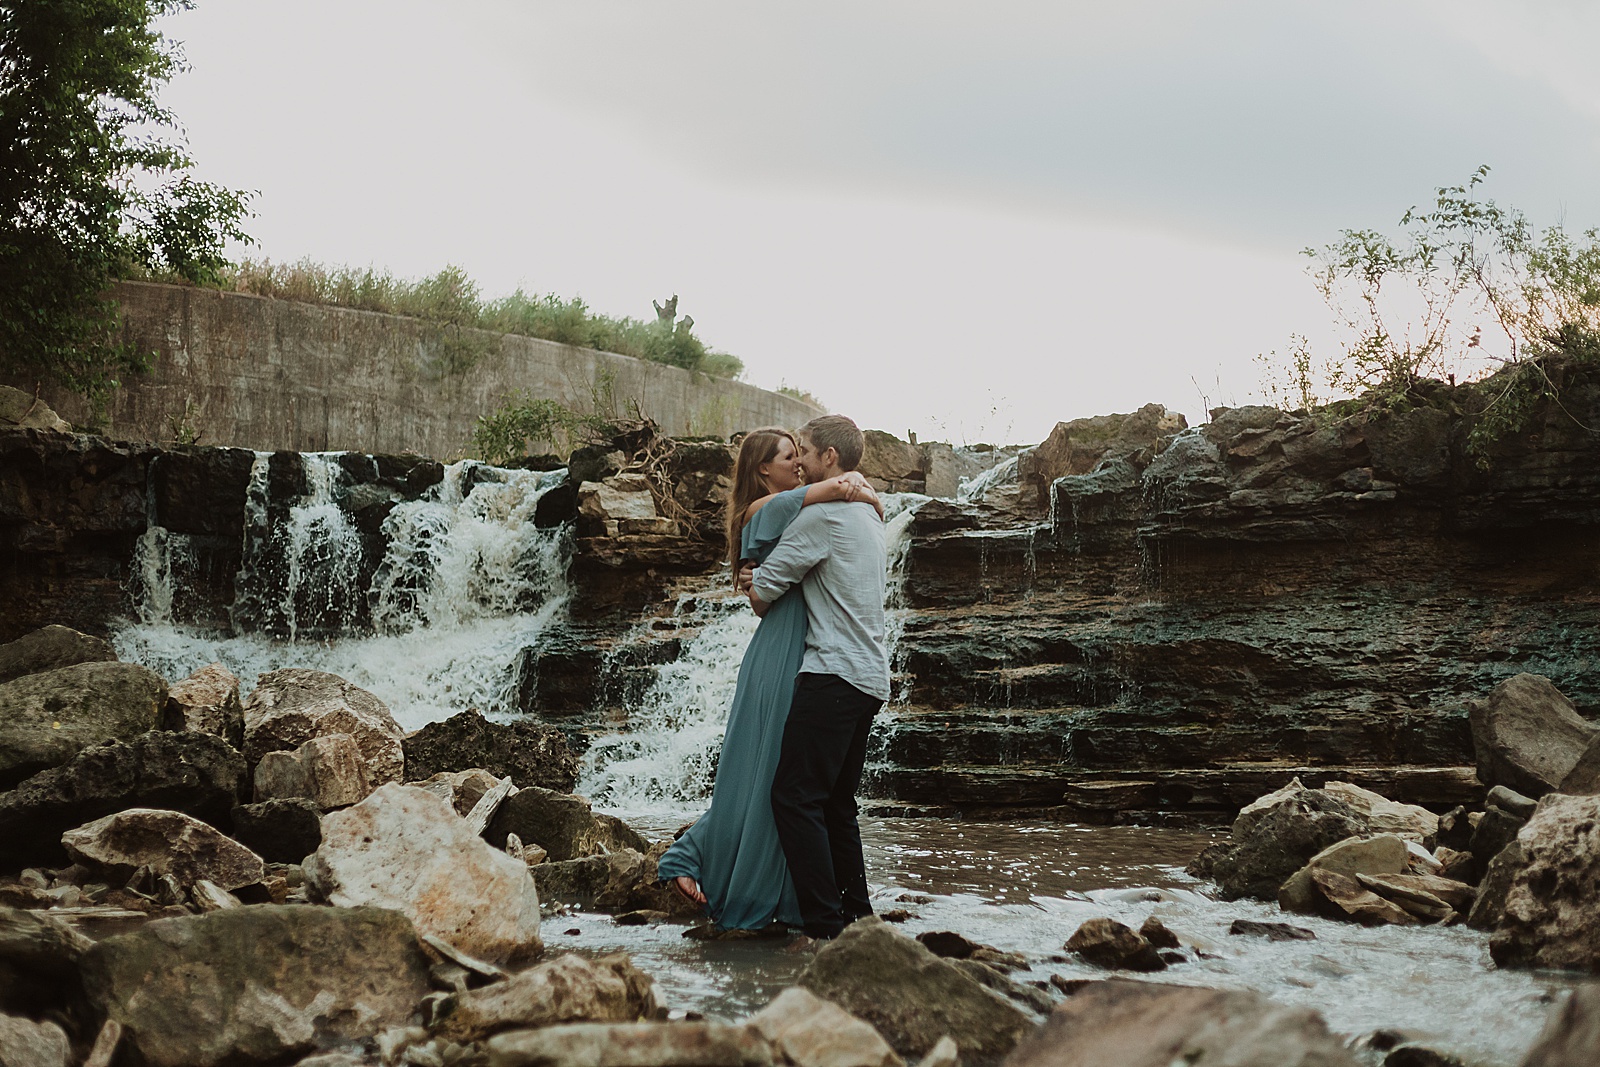 Sante Fe Lake engagement photos by Caitlyn Cloud Photography